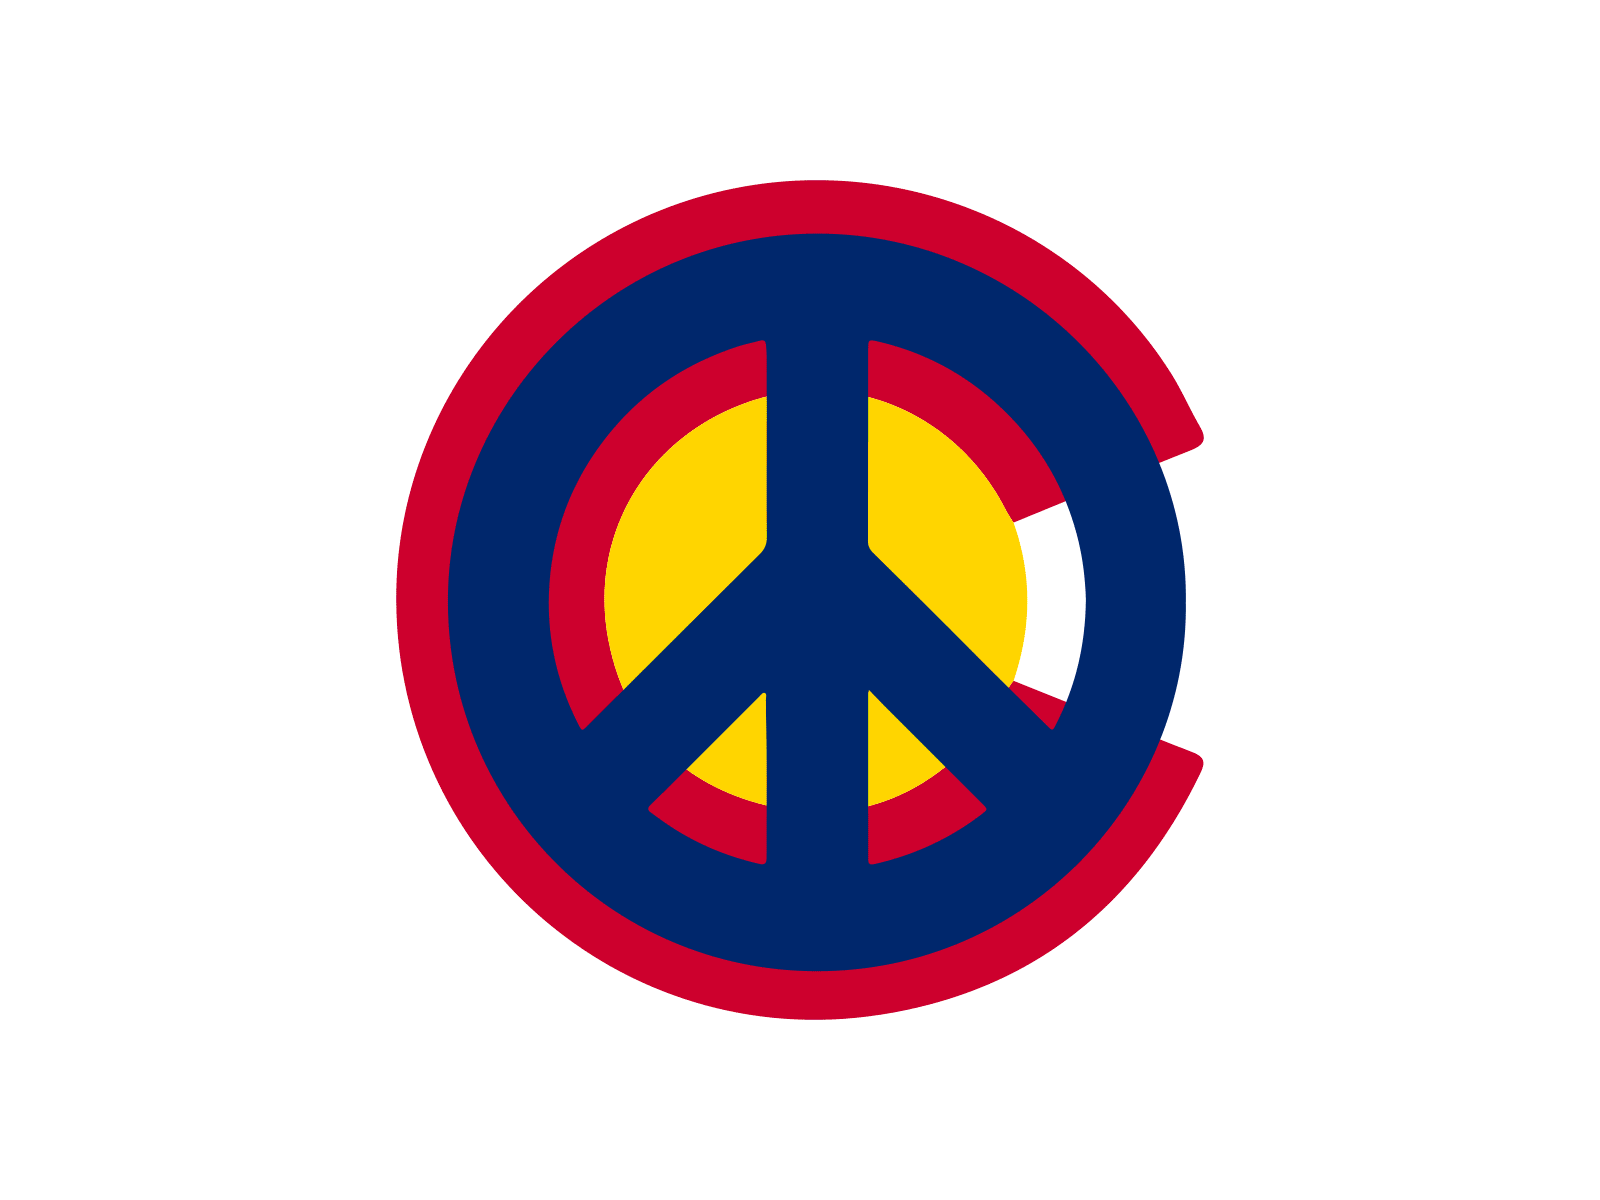 Peace for Colorado animated animatedgif art of the day badge logo design for change gif icons peace peace sign